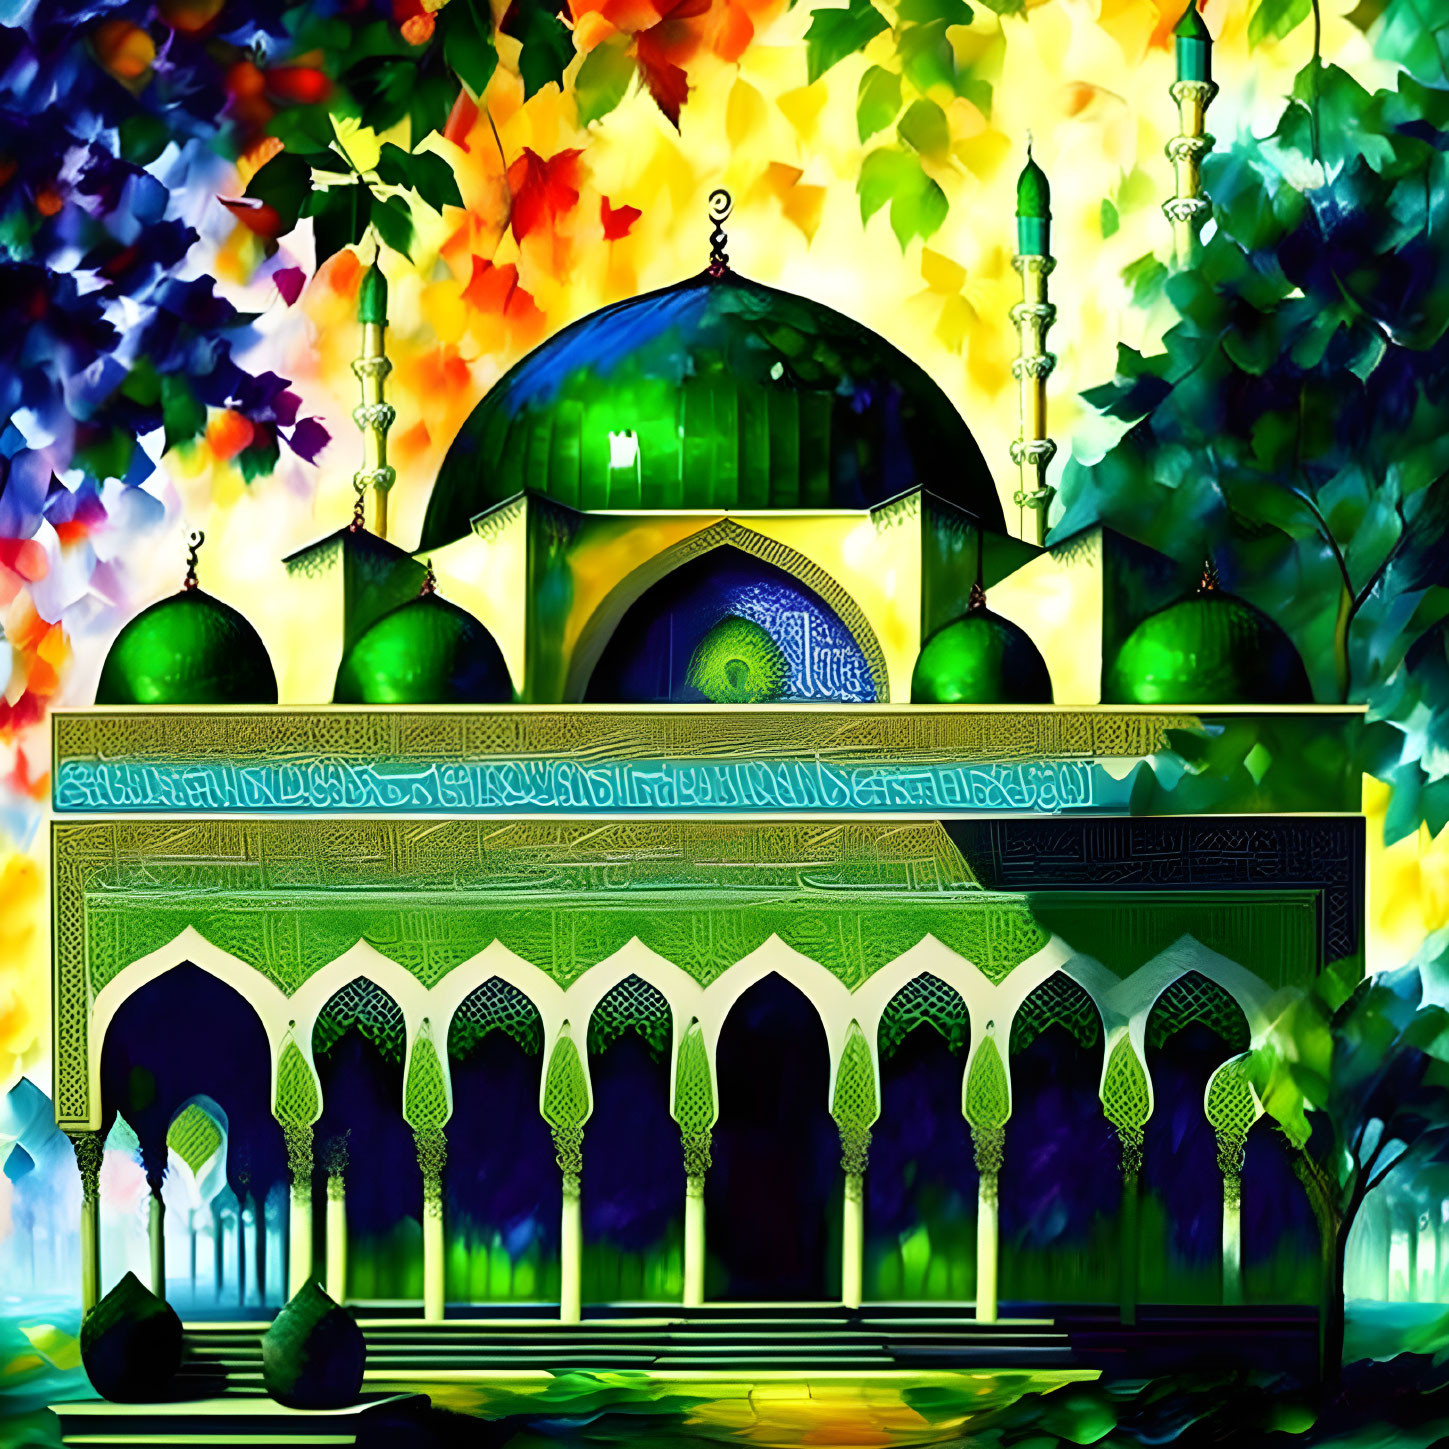 Colorful Digital Artwork: Mosque with Green Domes and Minarets on Abstract Foliage